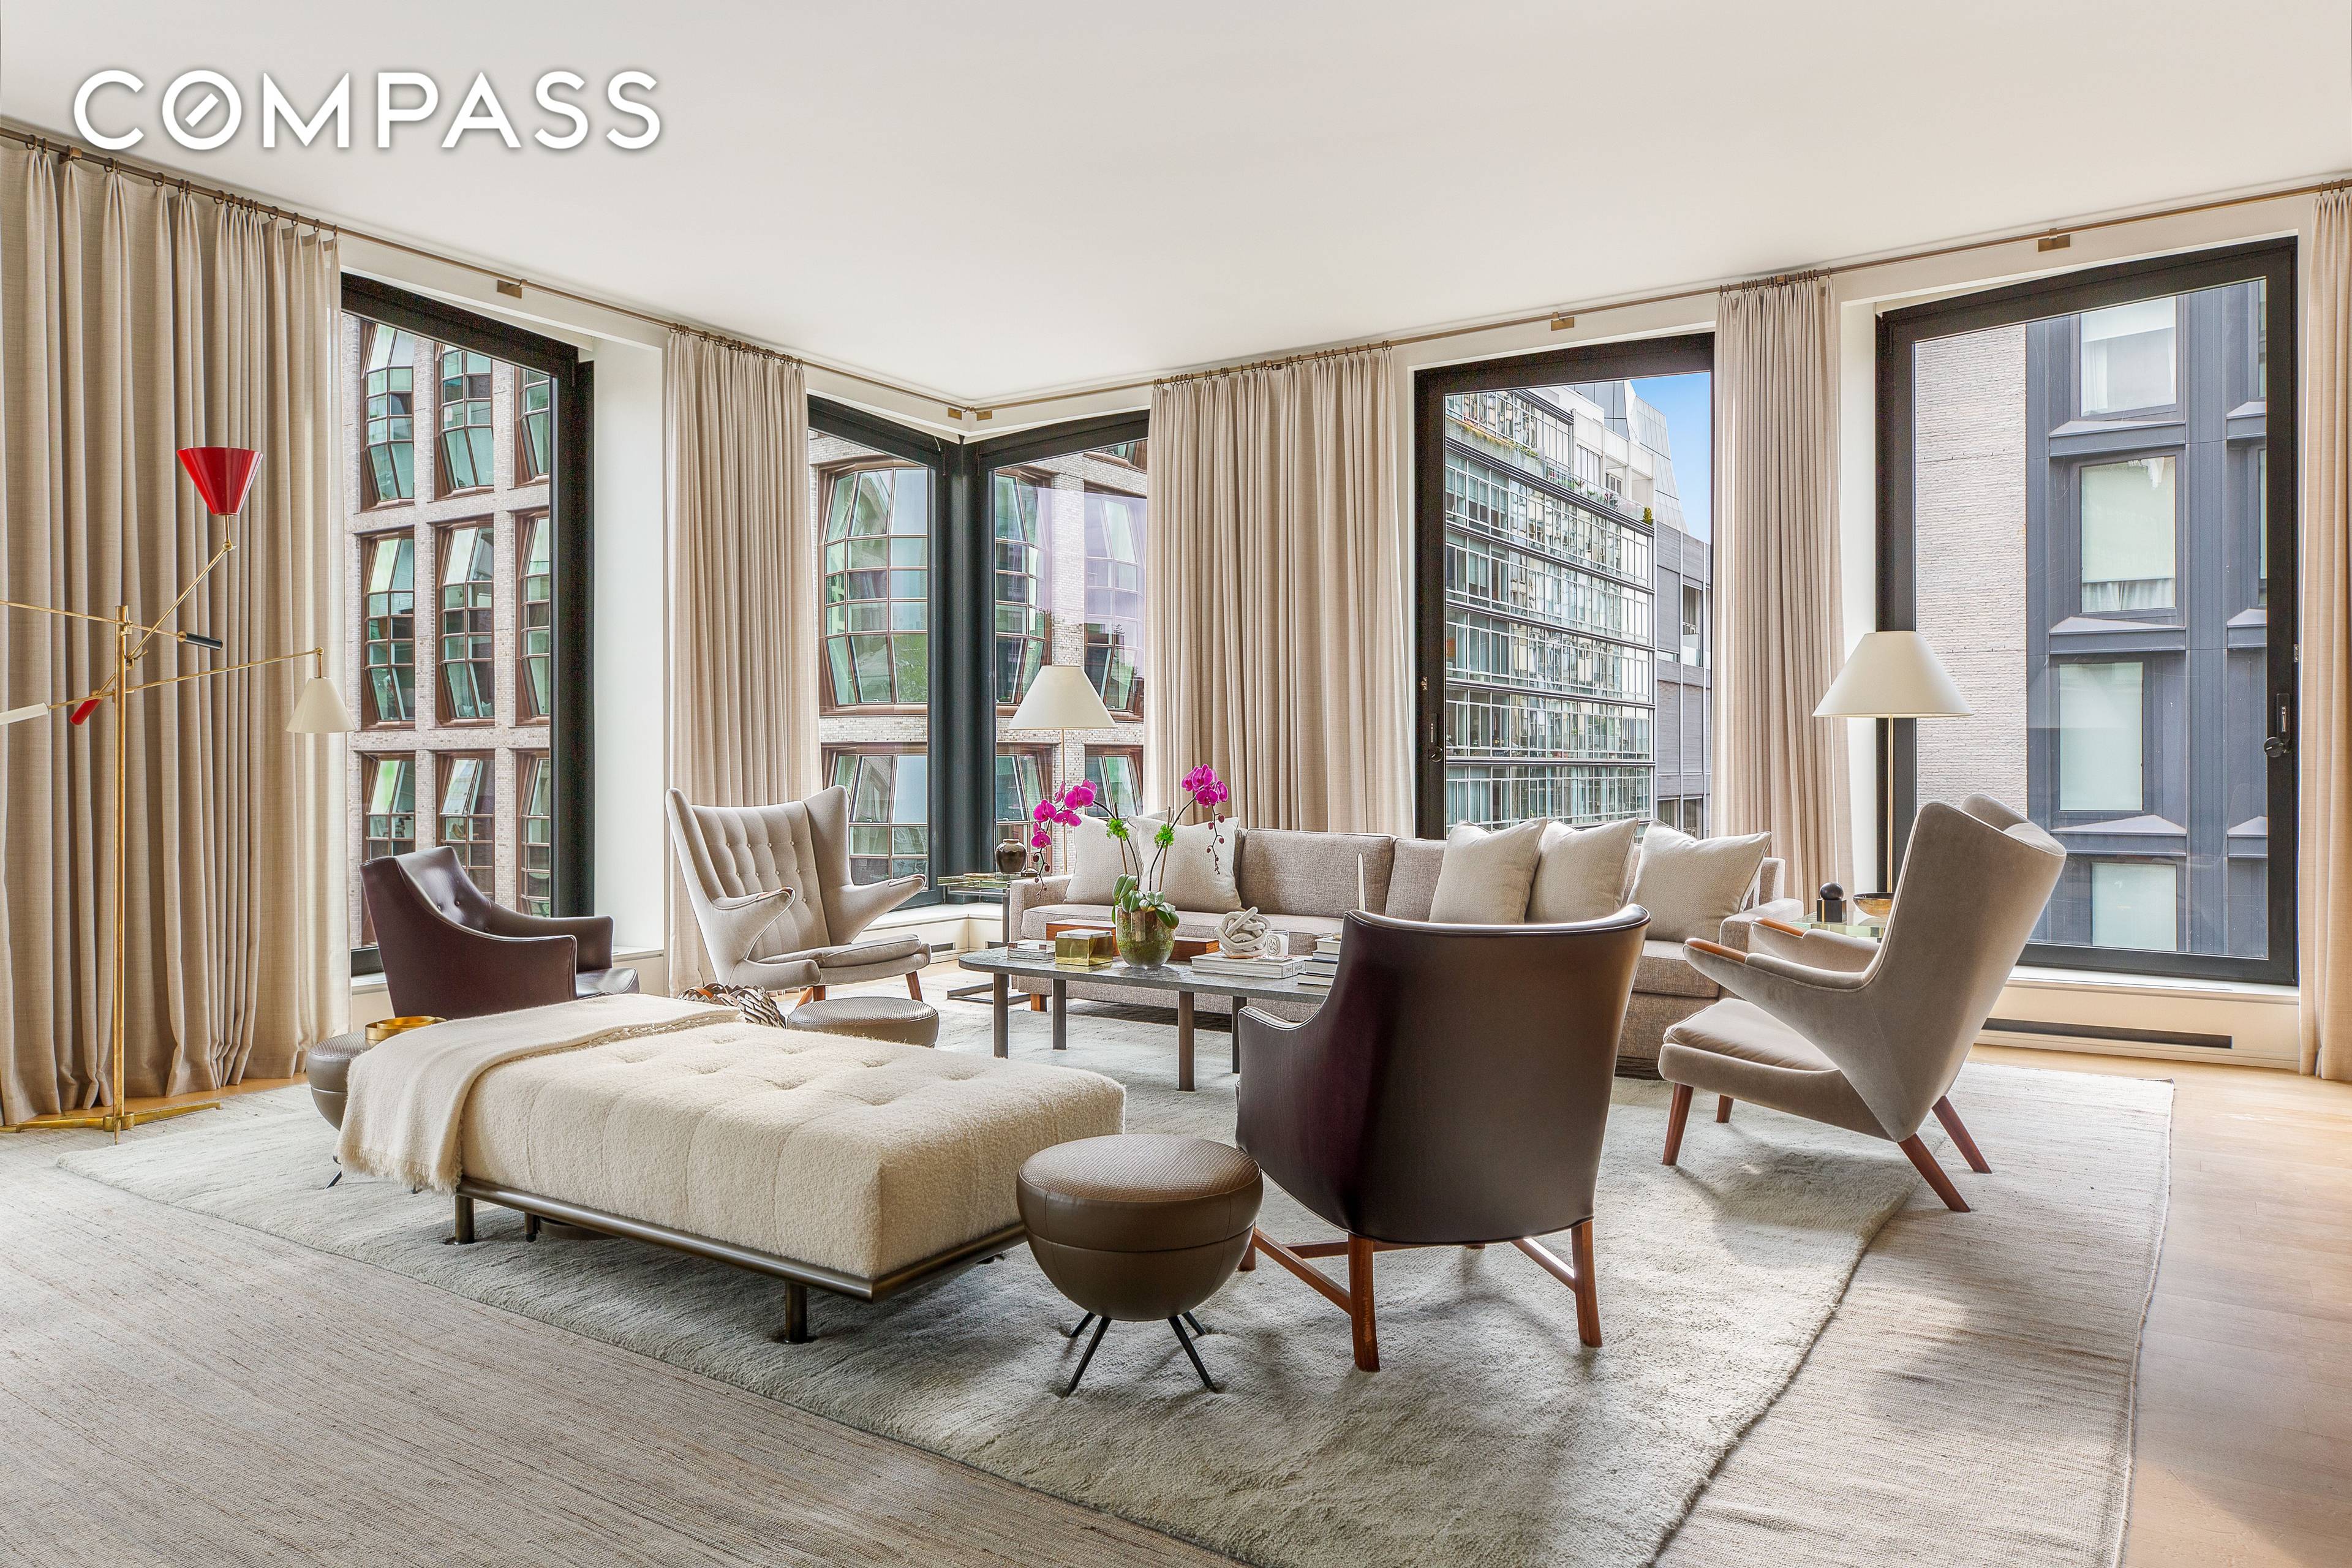 This sophisticated 2 3 bedroom home offers the very best of city living in the heart of West Chelsea, one of Manhattan's most desirable neighborhoods.